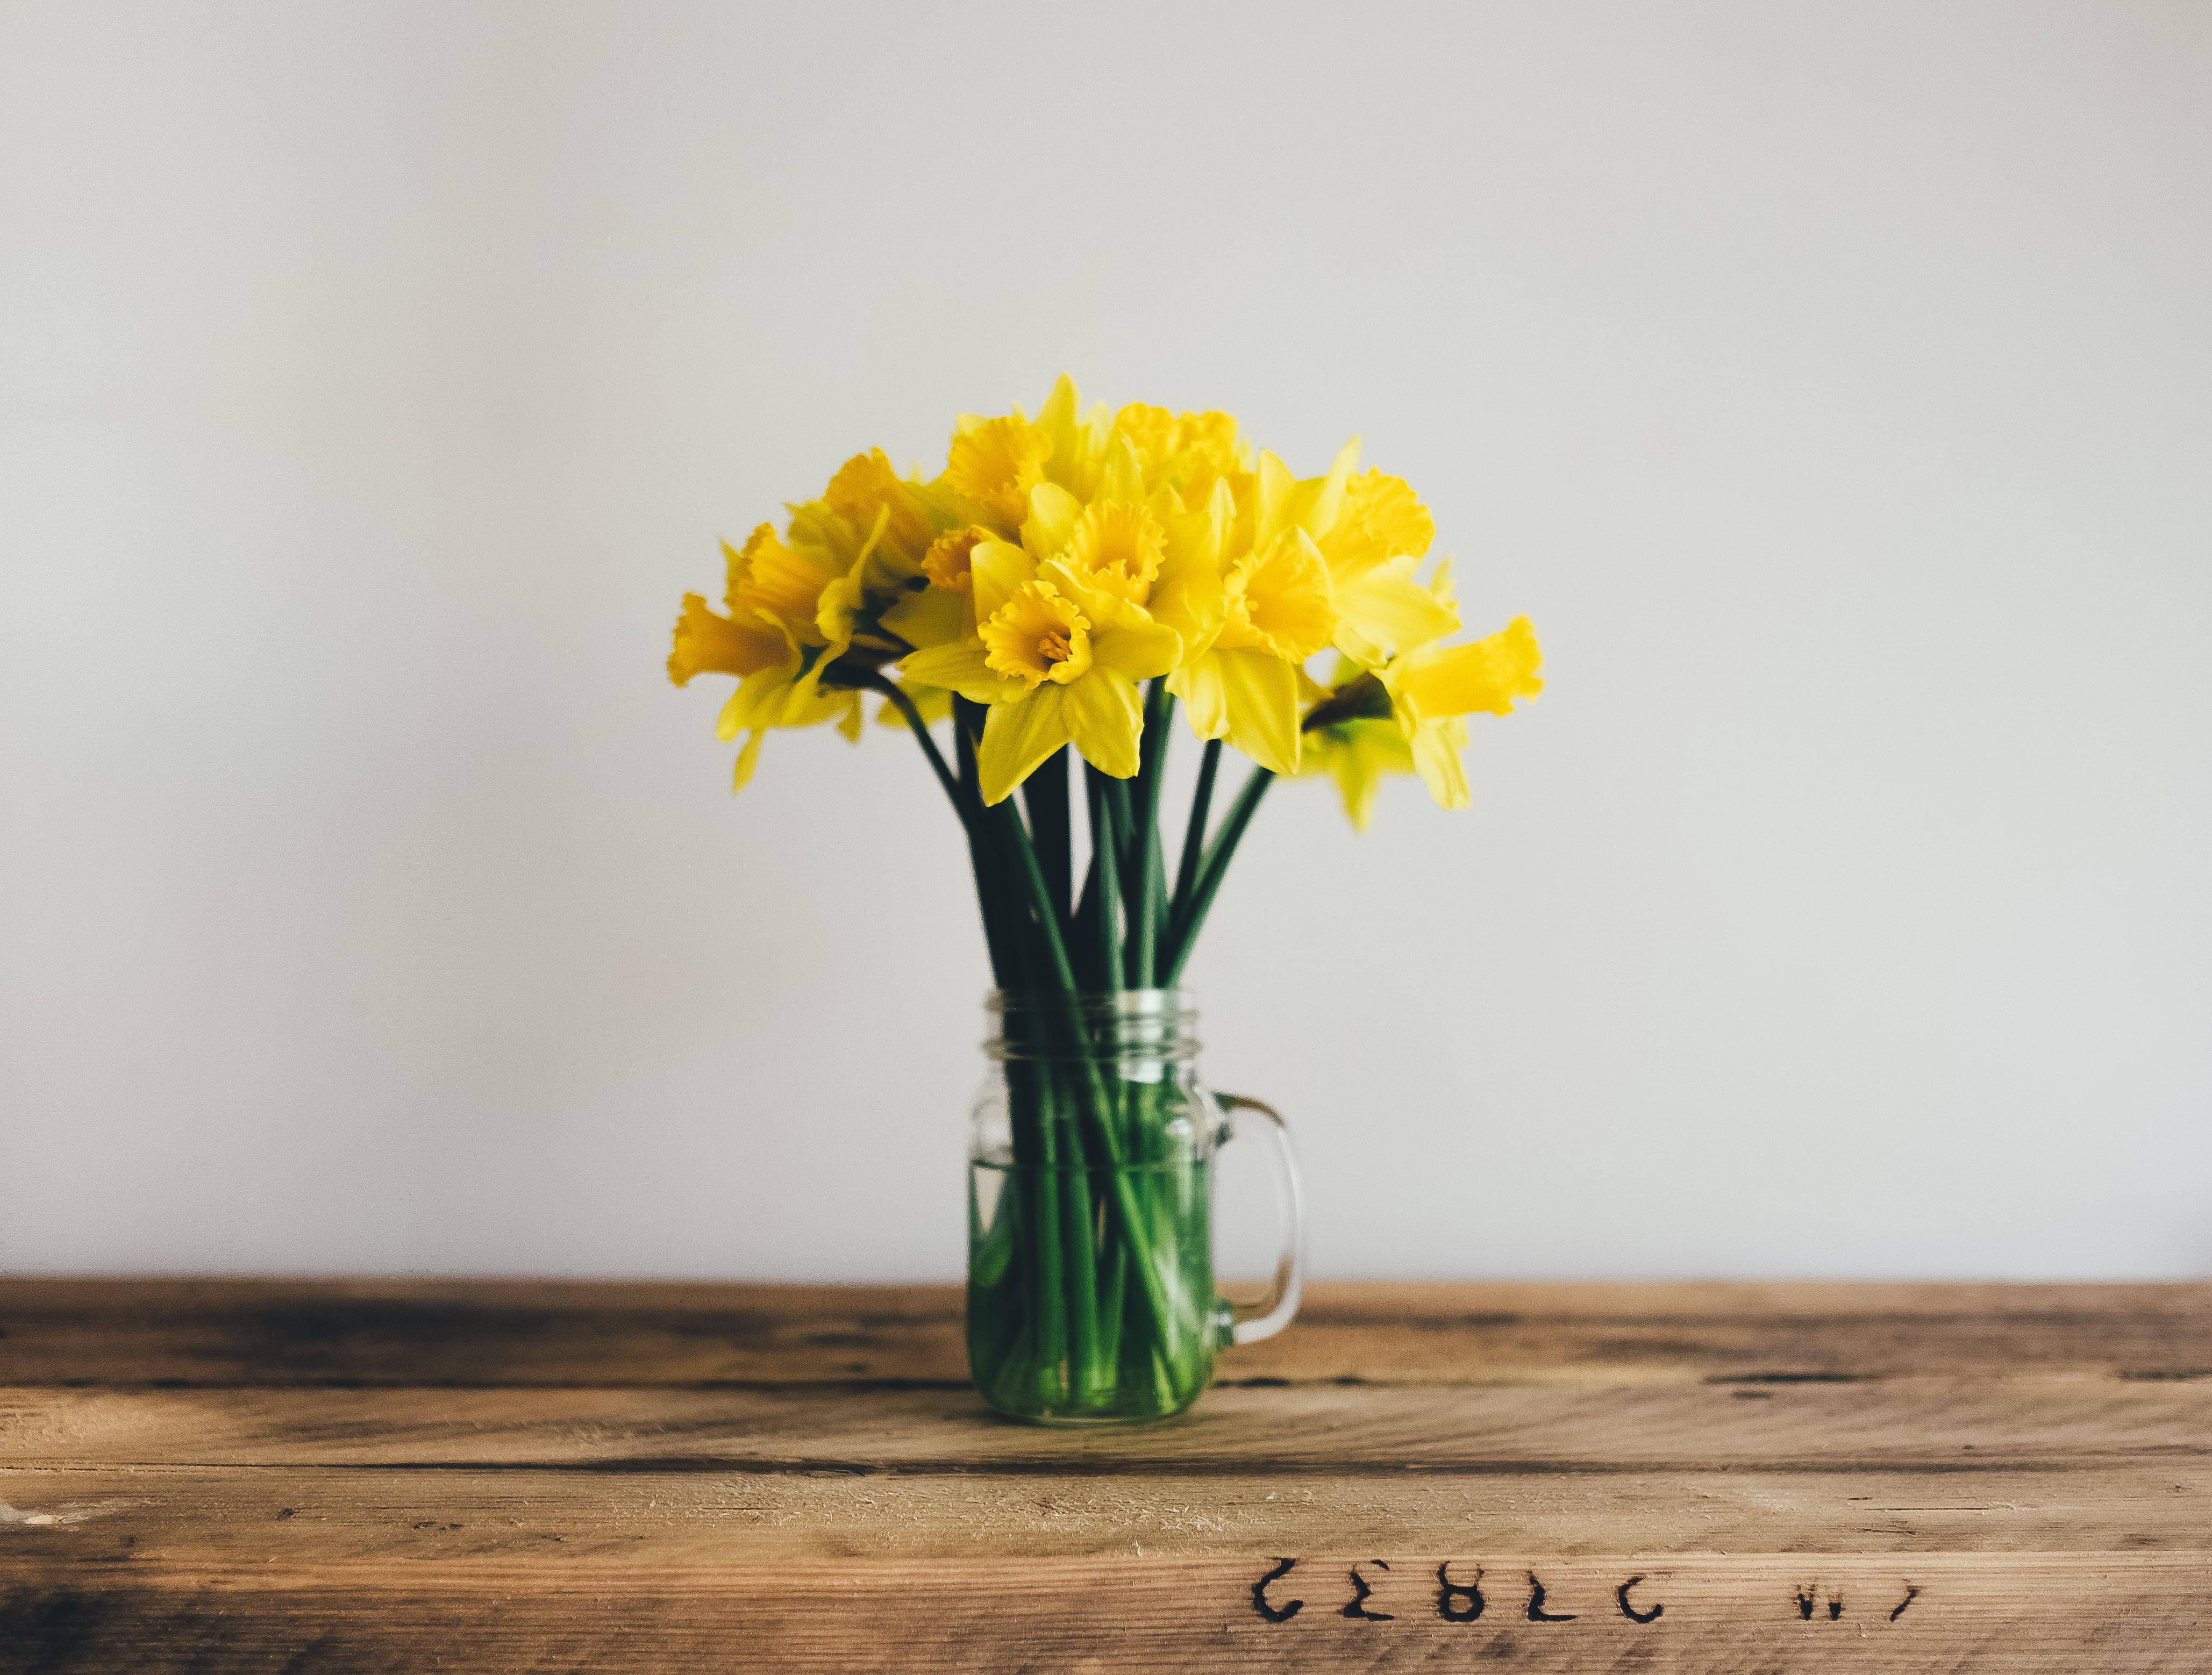 yellow daffodil flowers in clear glass mason jar on brown wooden surface